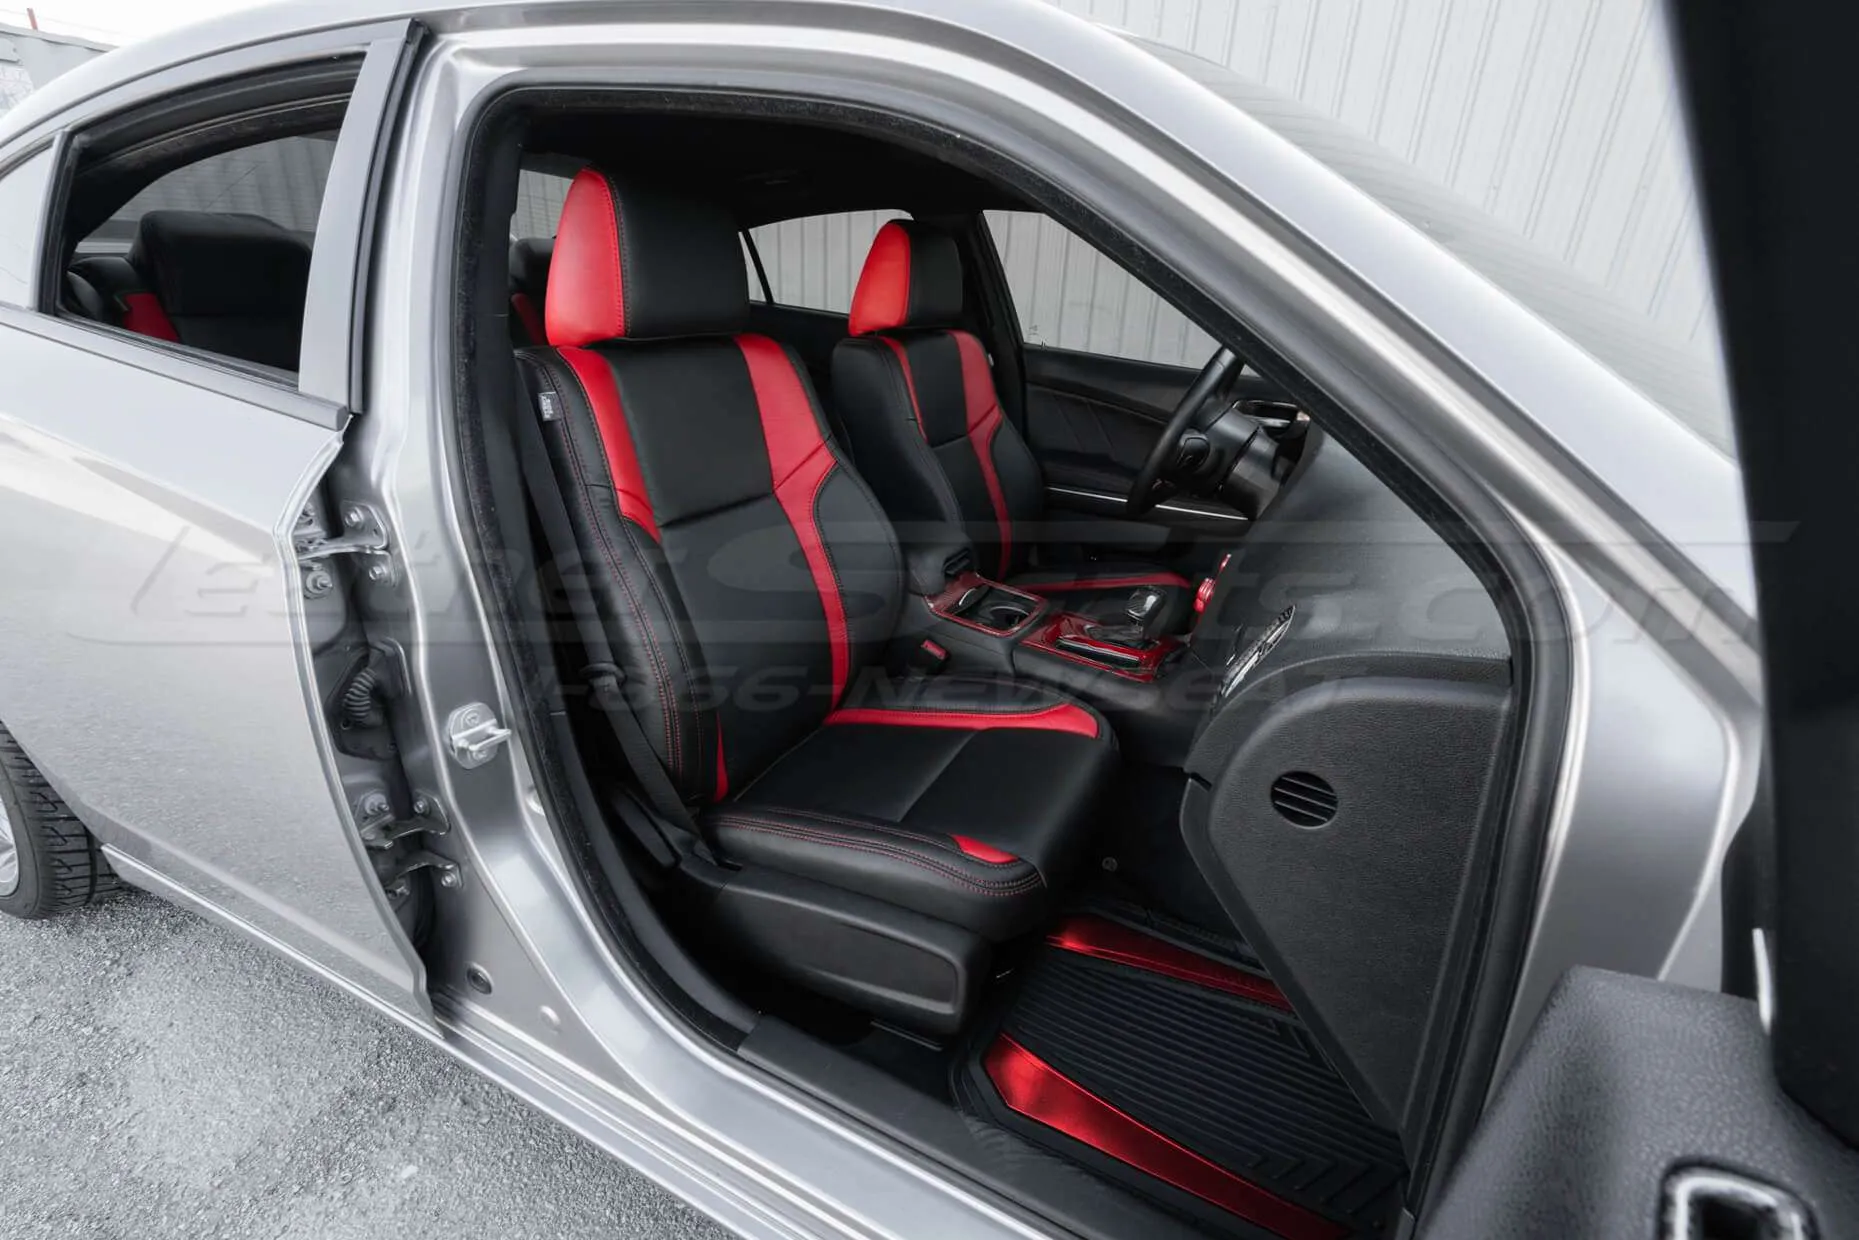 Black and Bright Red Leather Seats - Front passenger side